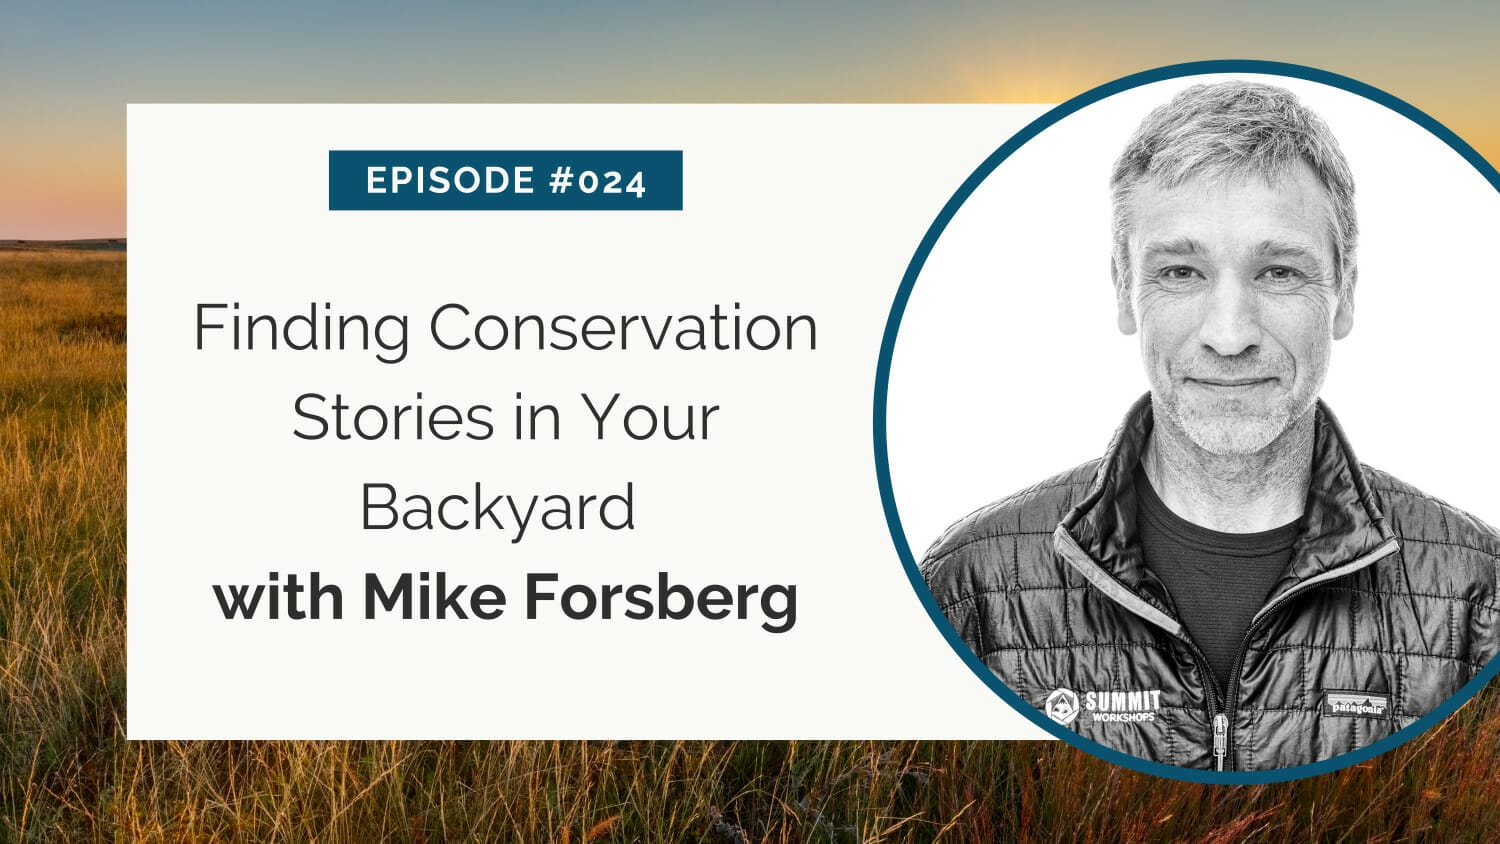 Promotional graphic for episode #024 of a podcast featuring a guest named mike forsberg, discussing the topic "finding conservation stories in your backyard.